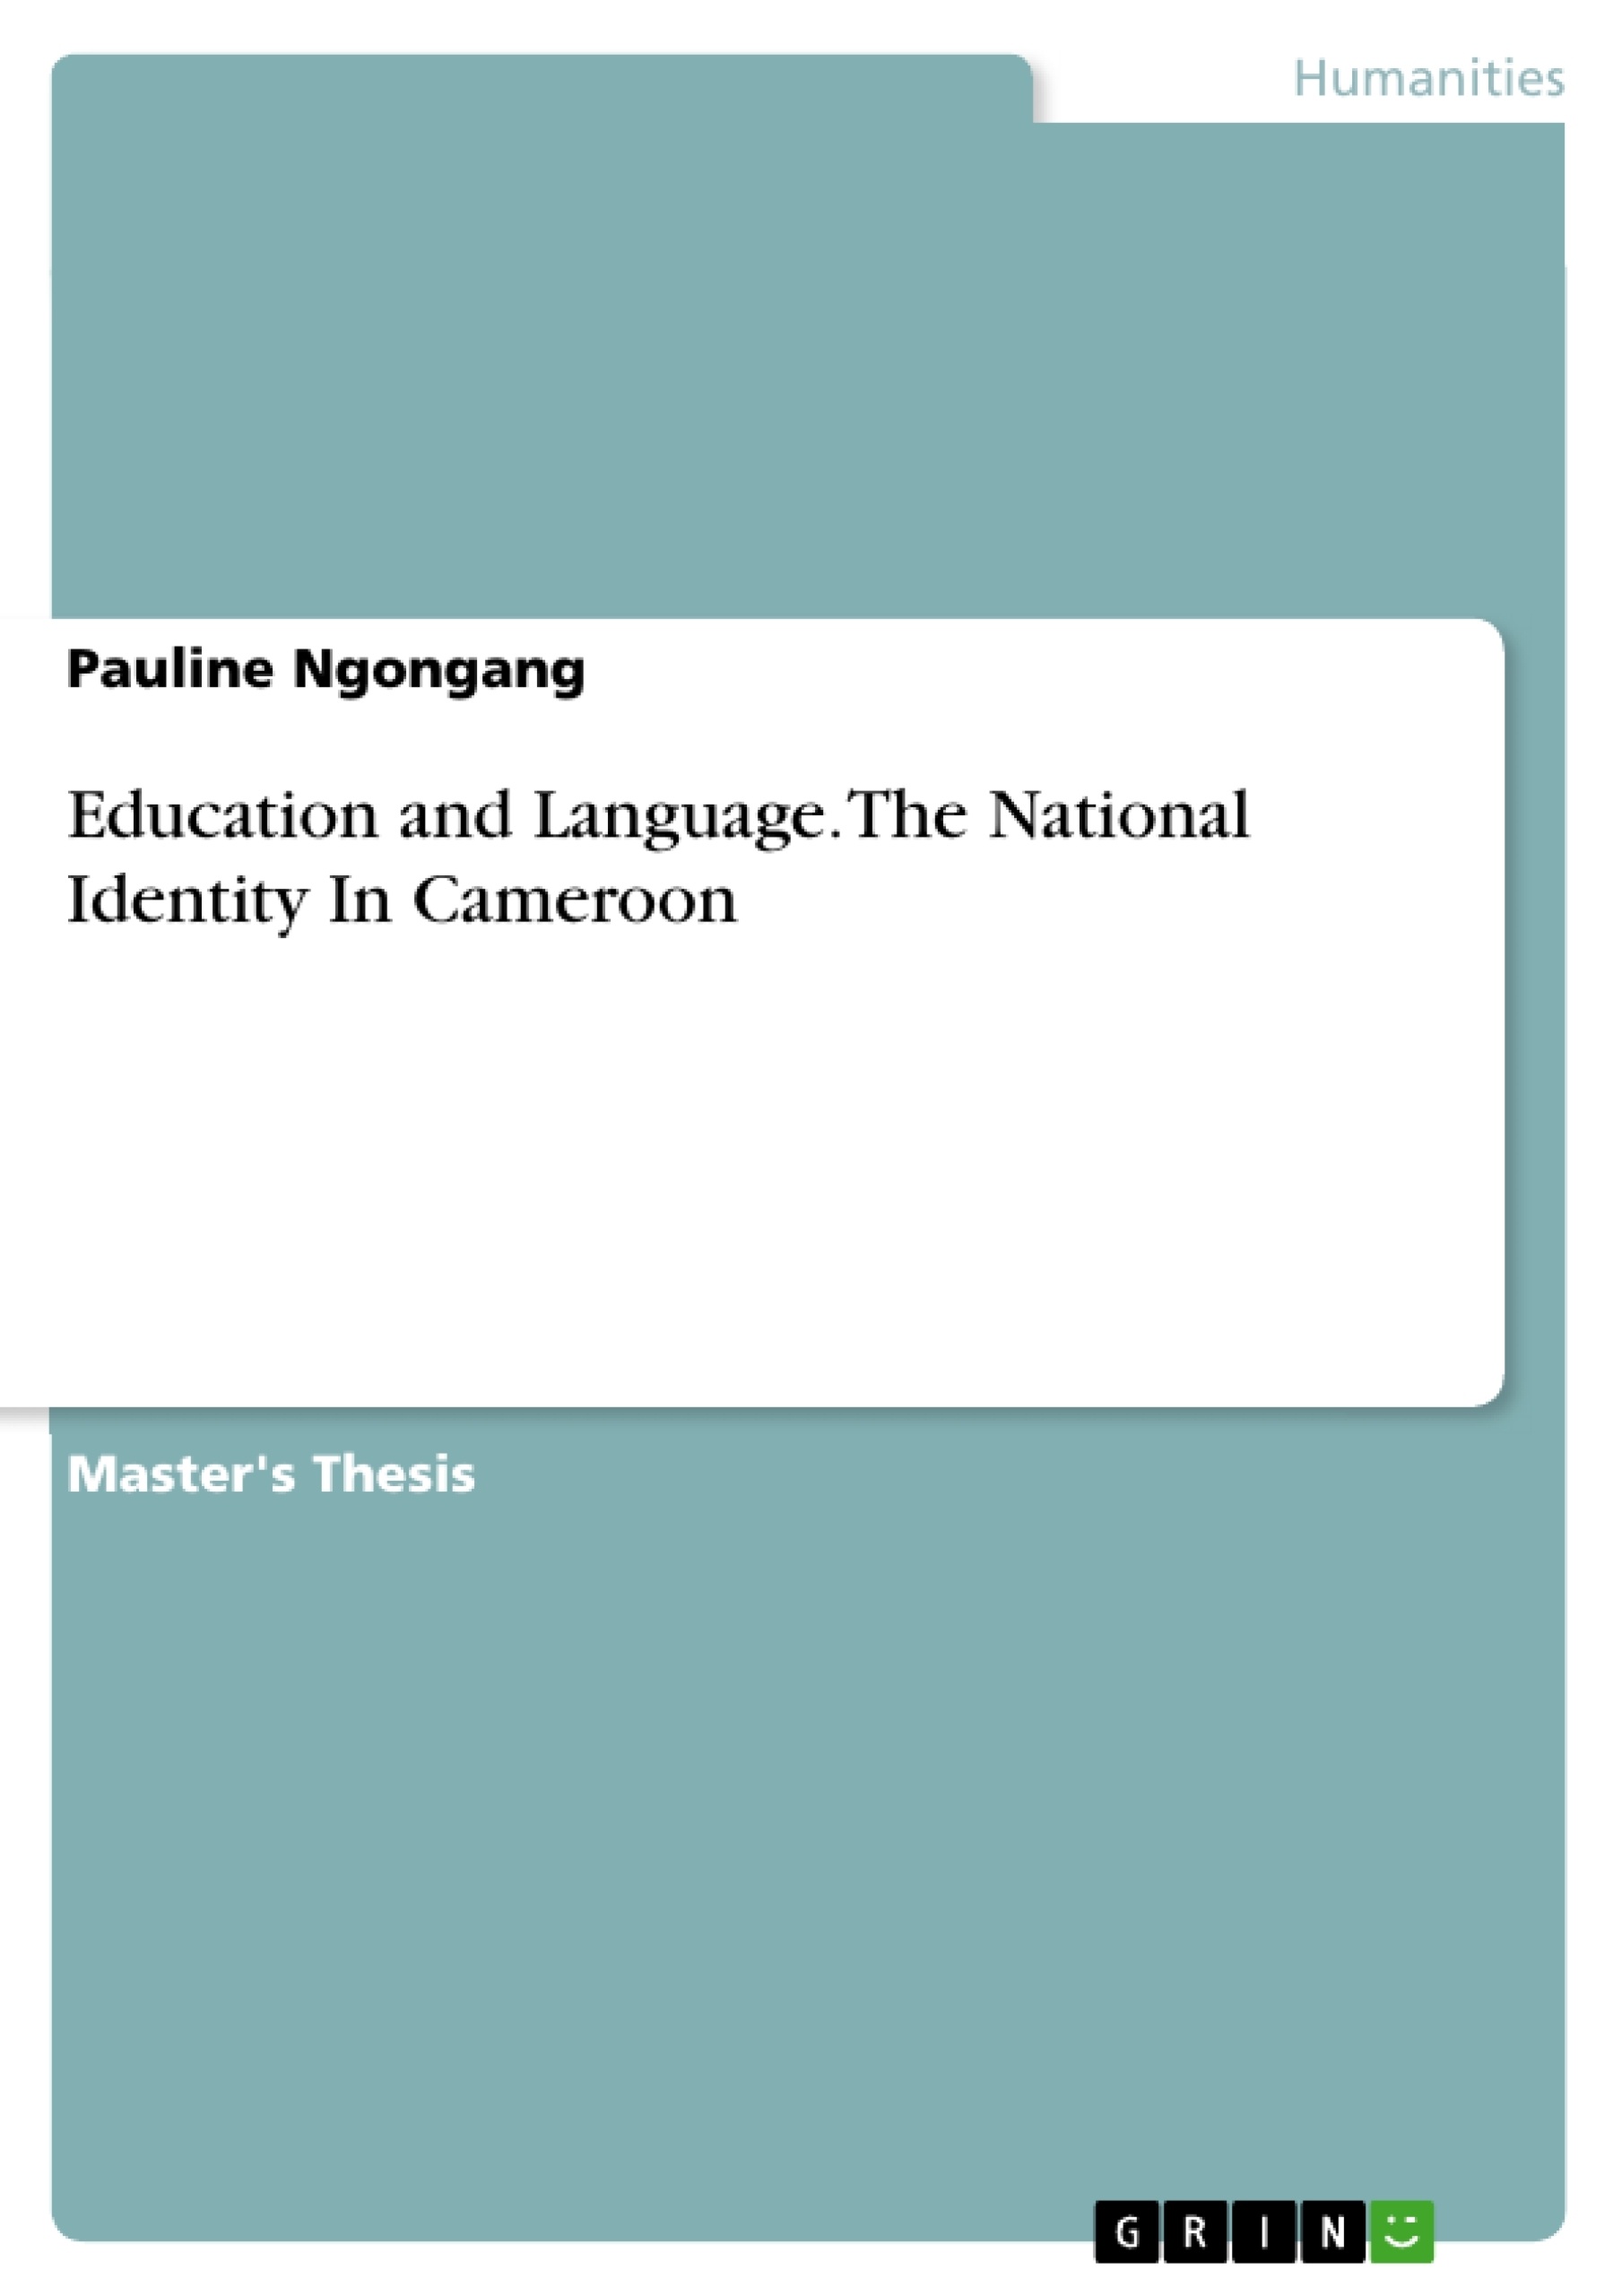 Title: Education and Language. The National Identity In Cameroon